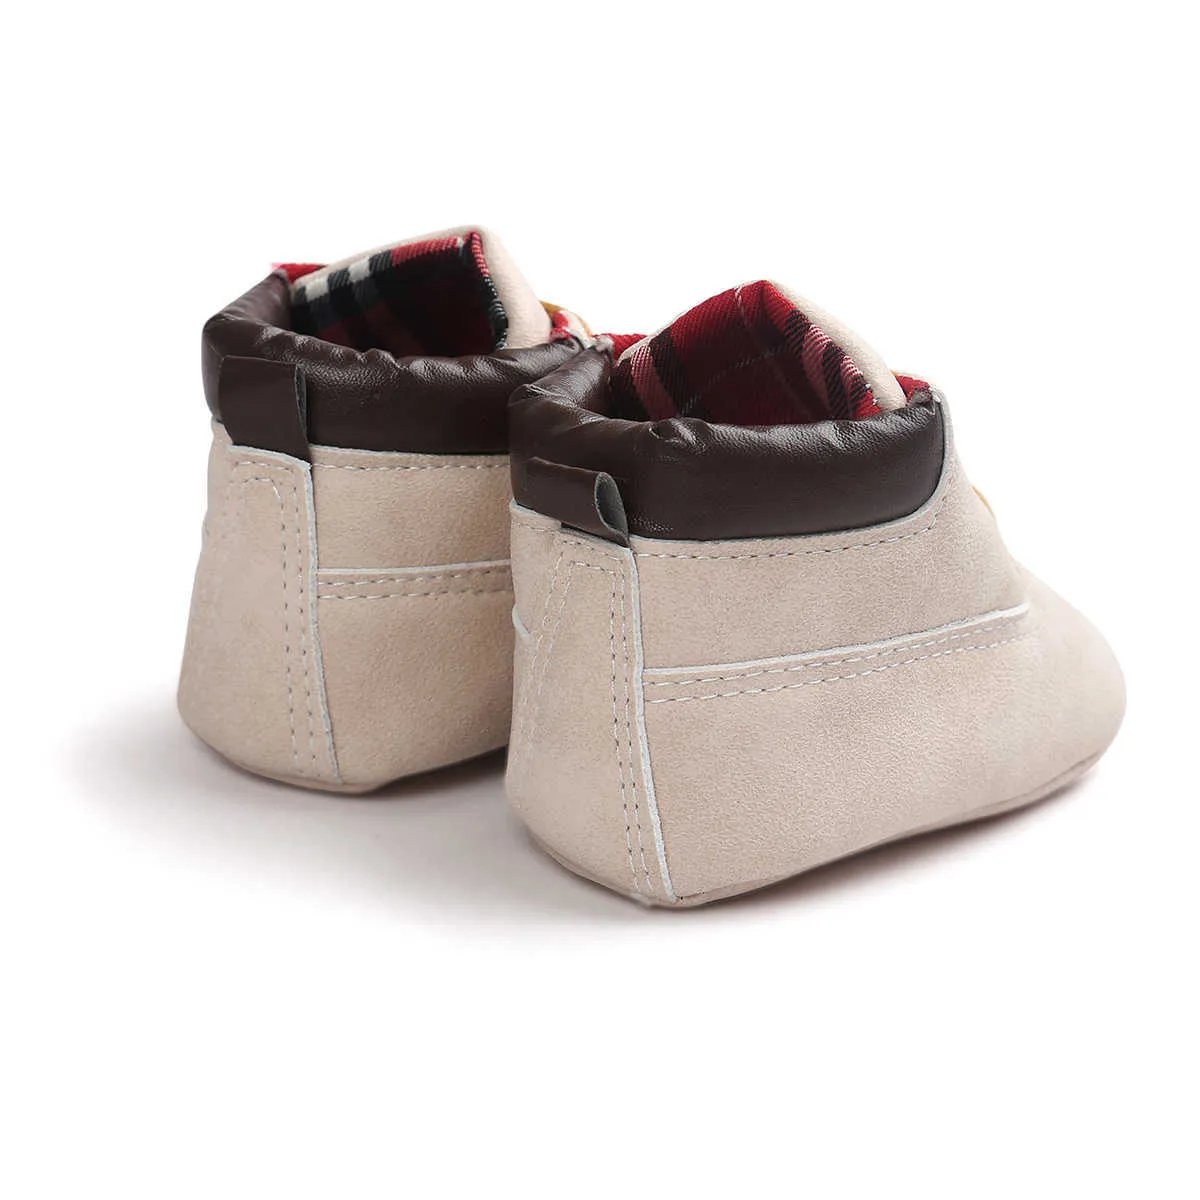 Baby Shoes Walkers Toddler Crib Boy Newborn Hight Heel Lace-up Martin Cotton Comfor Soft Sole PU Leather First Walkers Casual Moccasins